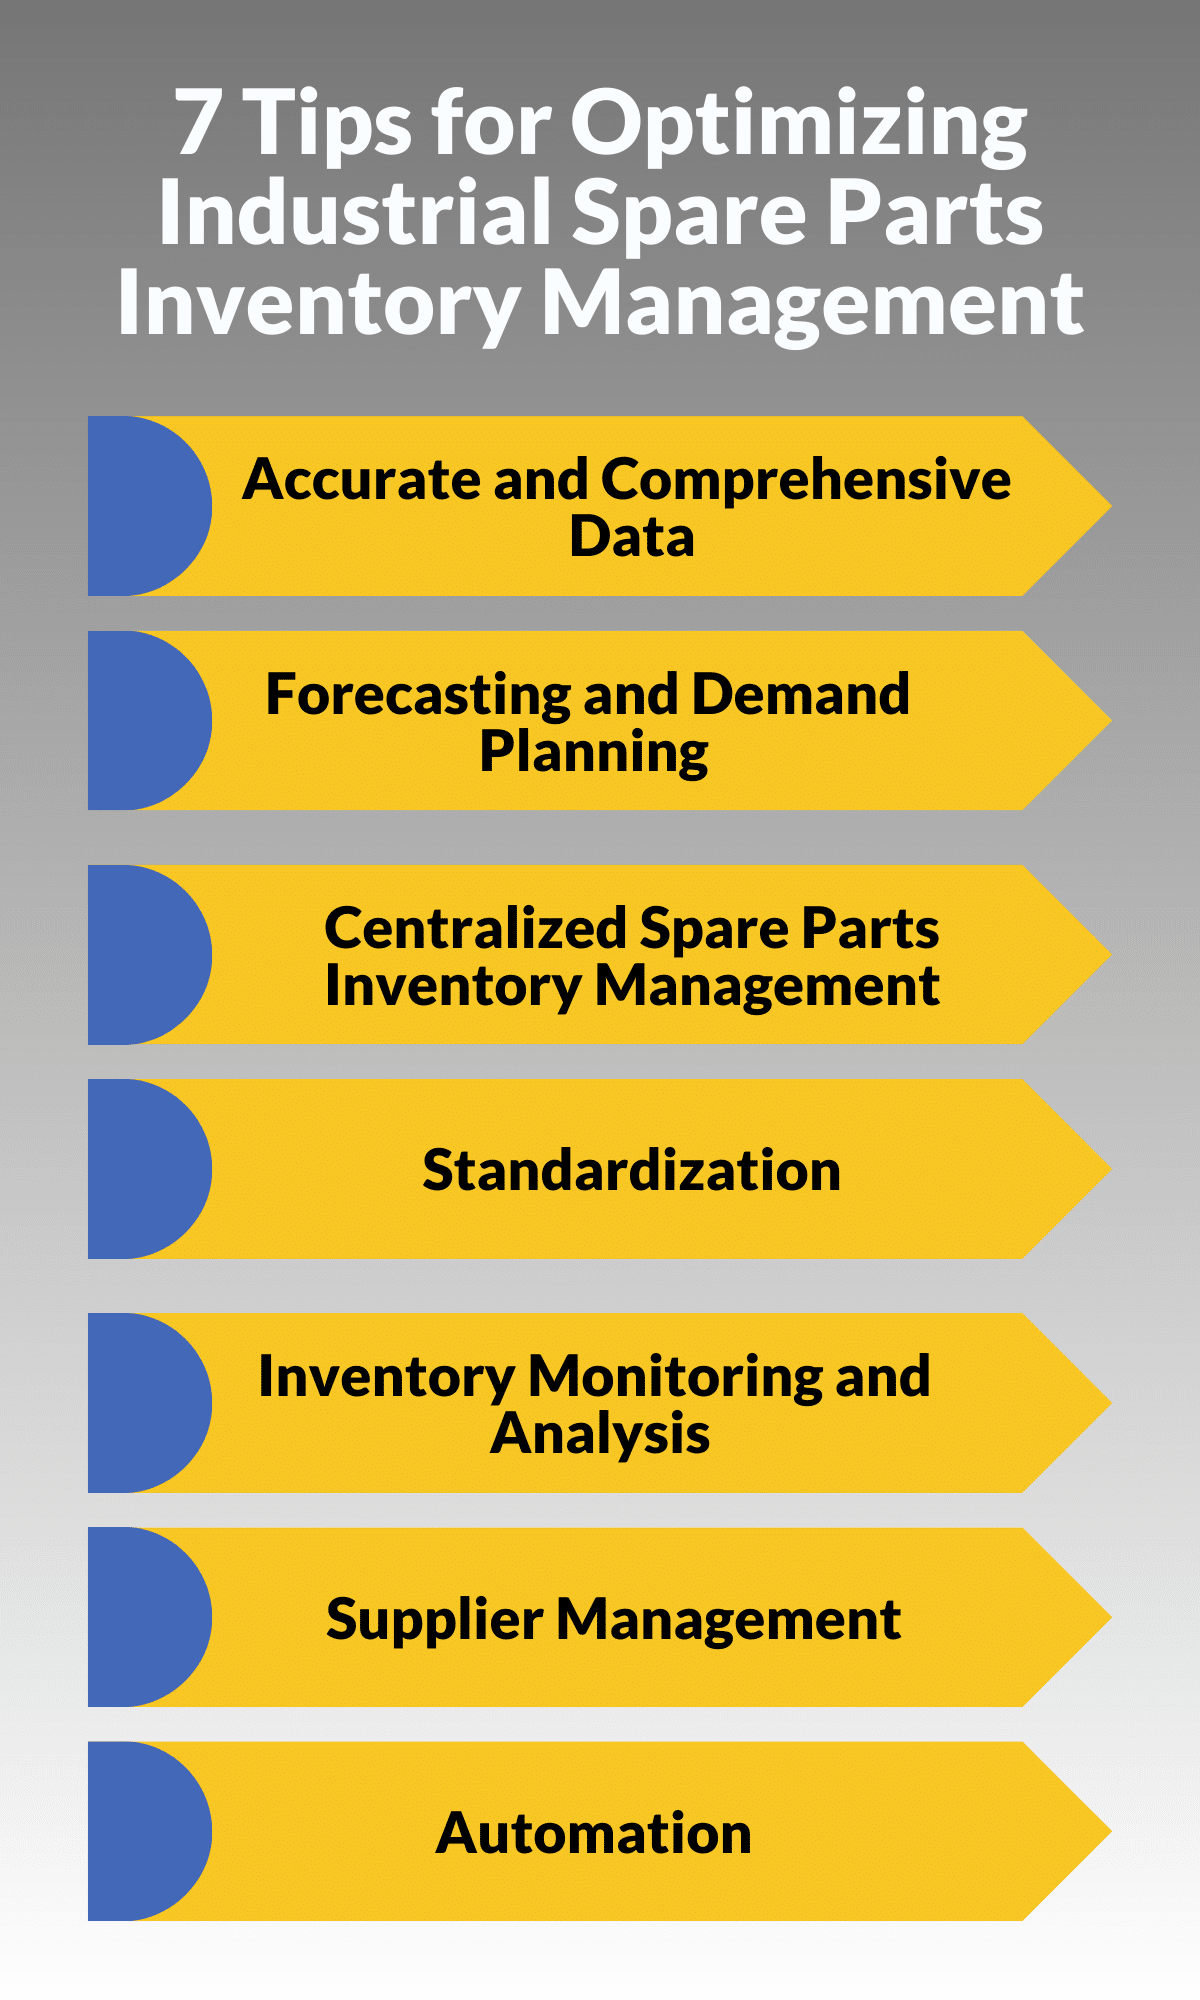 7 Best Practices for Optimizing Industrial Spare Parts Inventory Management.